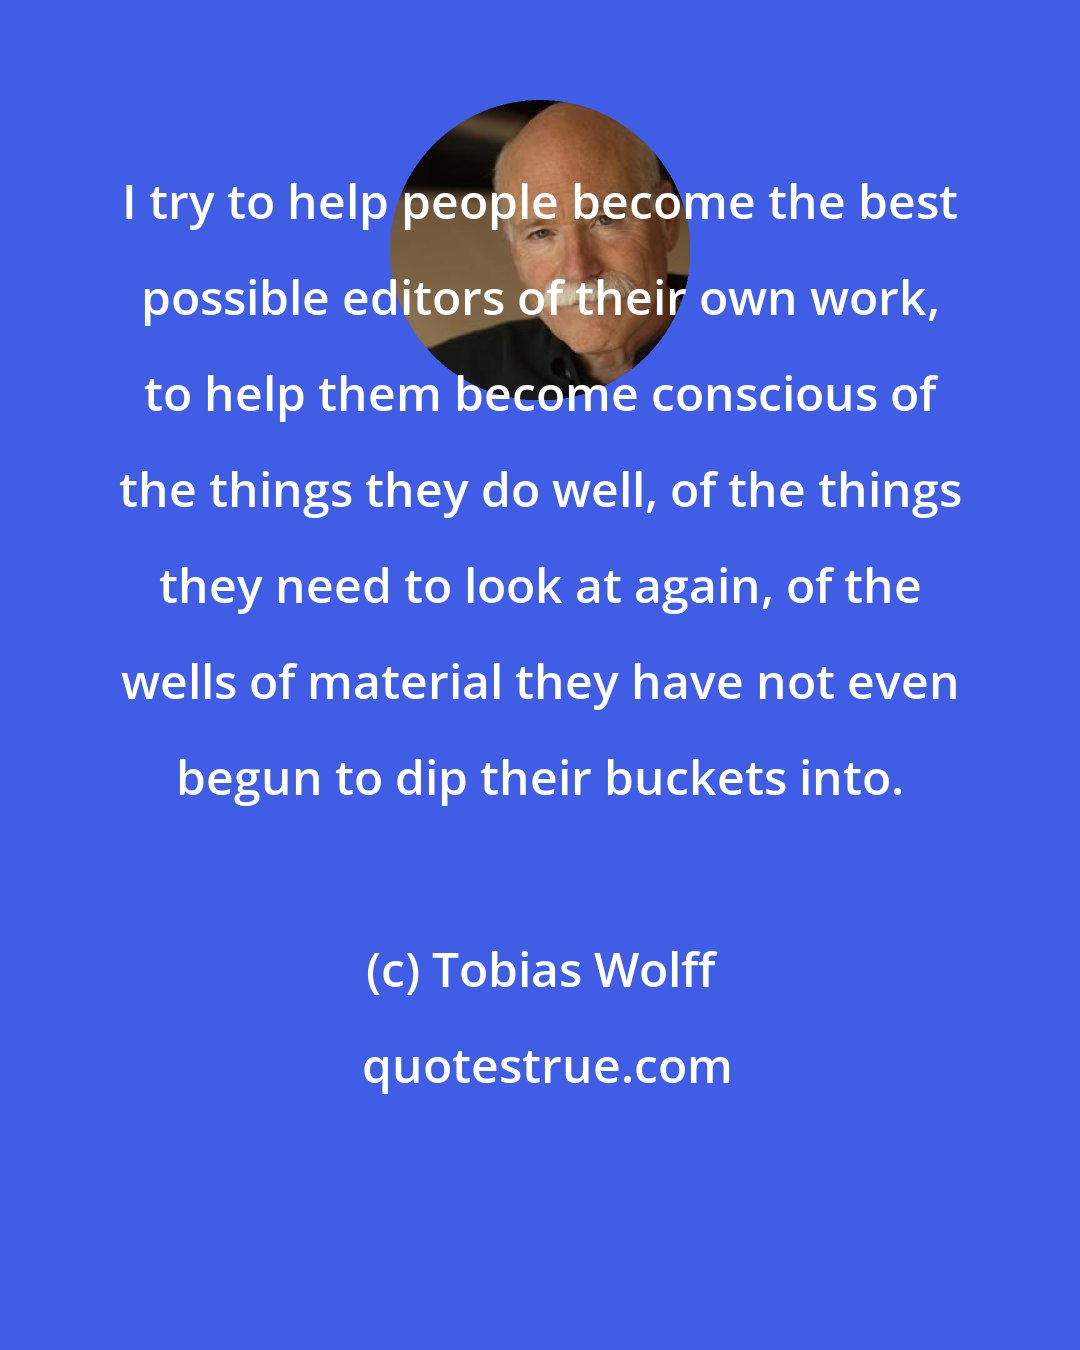 Tobias Wolff: I try to help people become the best possible editors of their own work, to help them become conscious of the things they do well, of the things they need to look at again, of the wells of material they have not even begun to dip their buckets into.